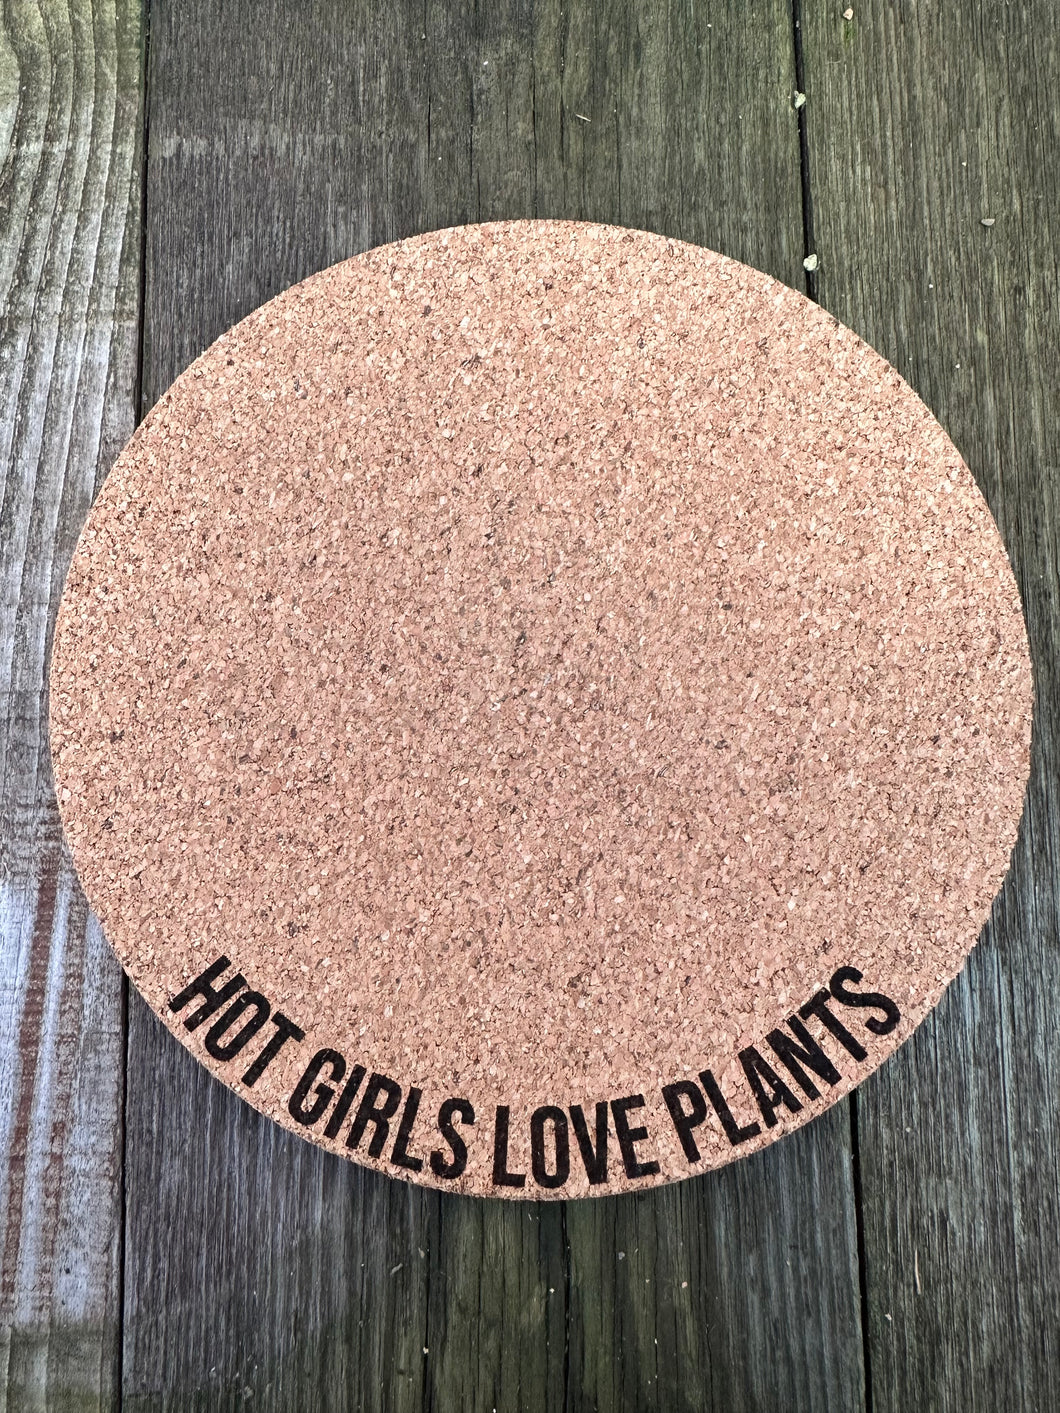 Hot Girls Love Plants Plant Mat - Engraved Cork Round - Cork Bottom - No Plastic or Rubber - All Natural Material